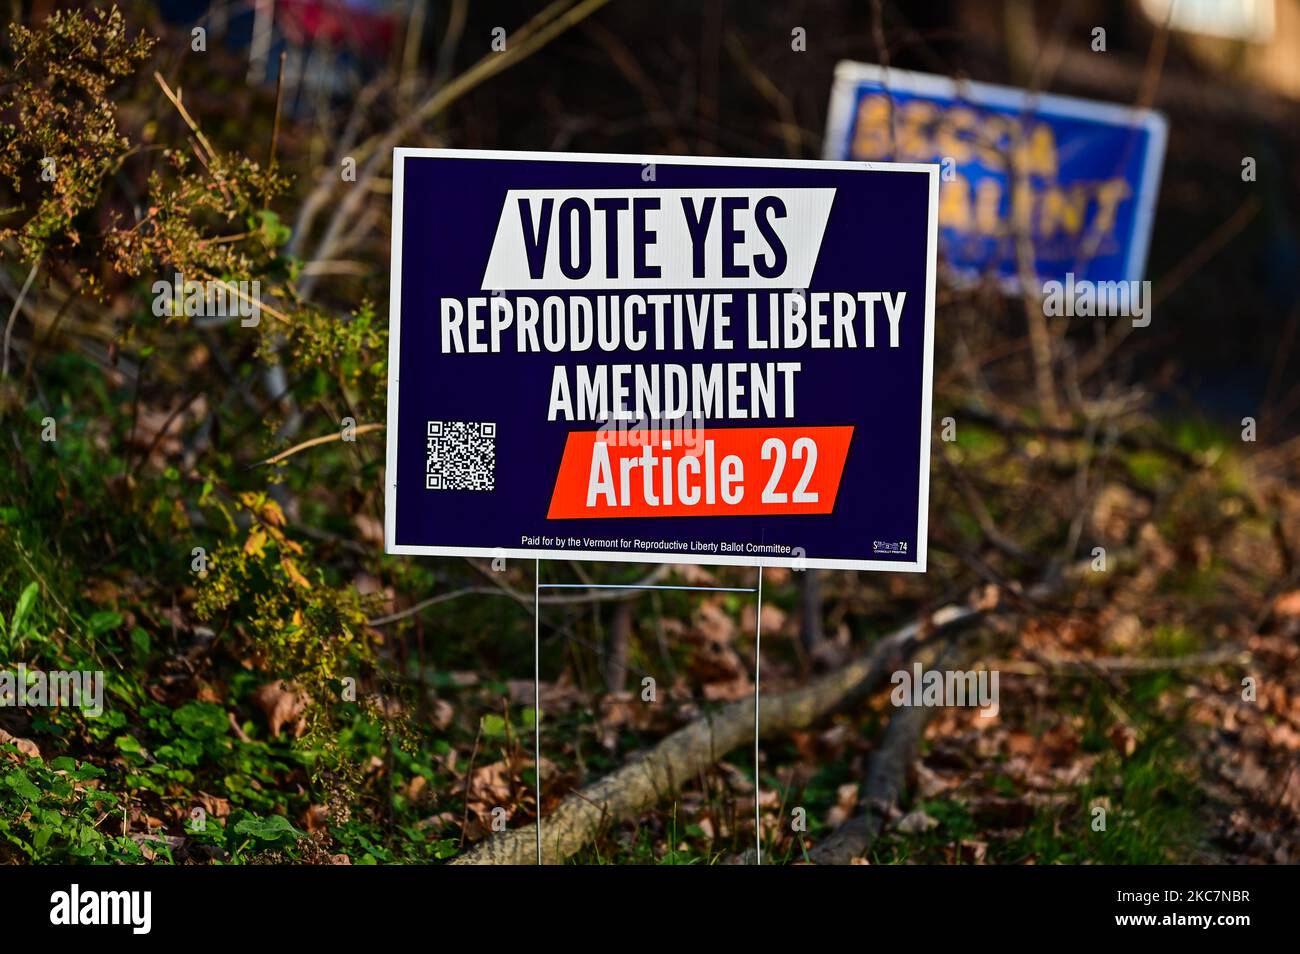 Vermont demonstrators in favor of reproductive rights amendment to the Vermont state constitution, Montpelier, Vermont, New England, USA. Stock Photo